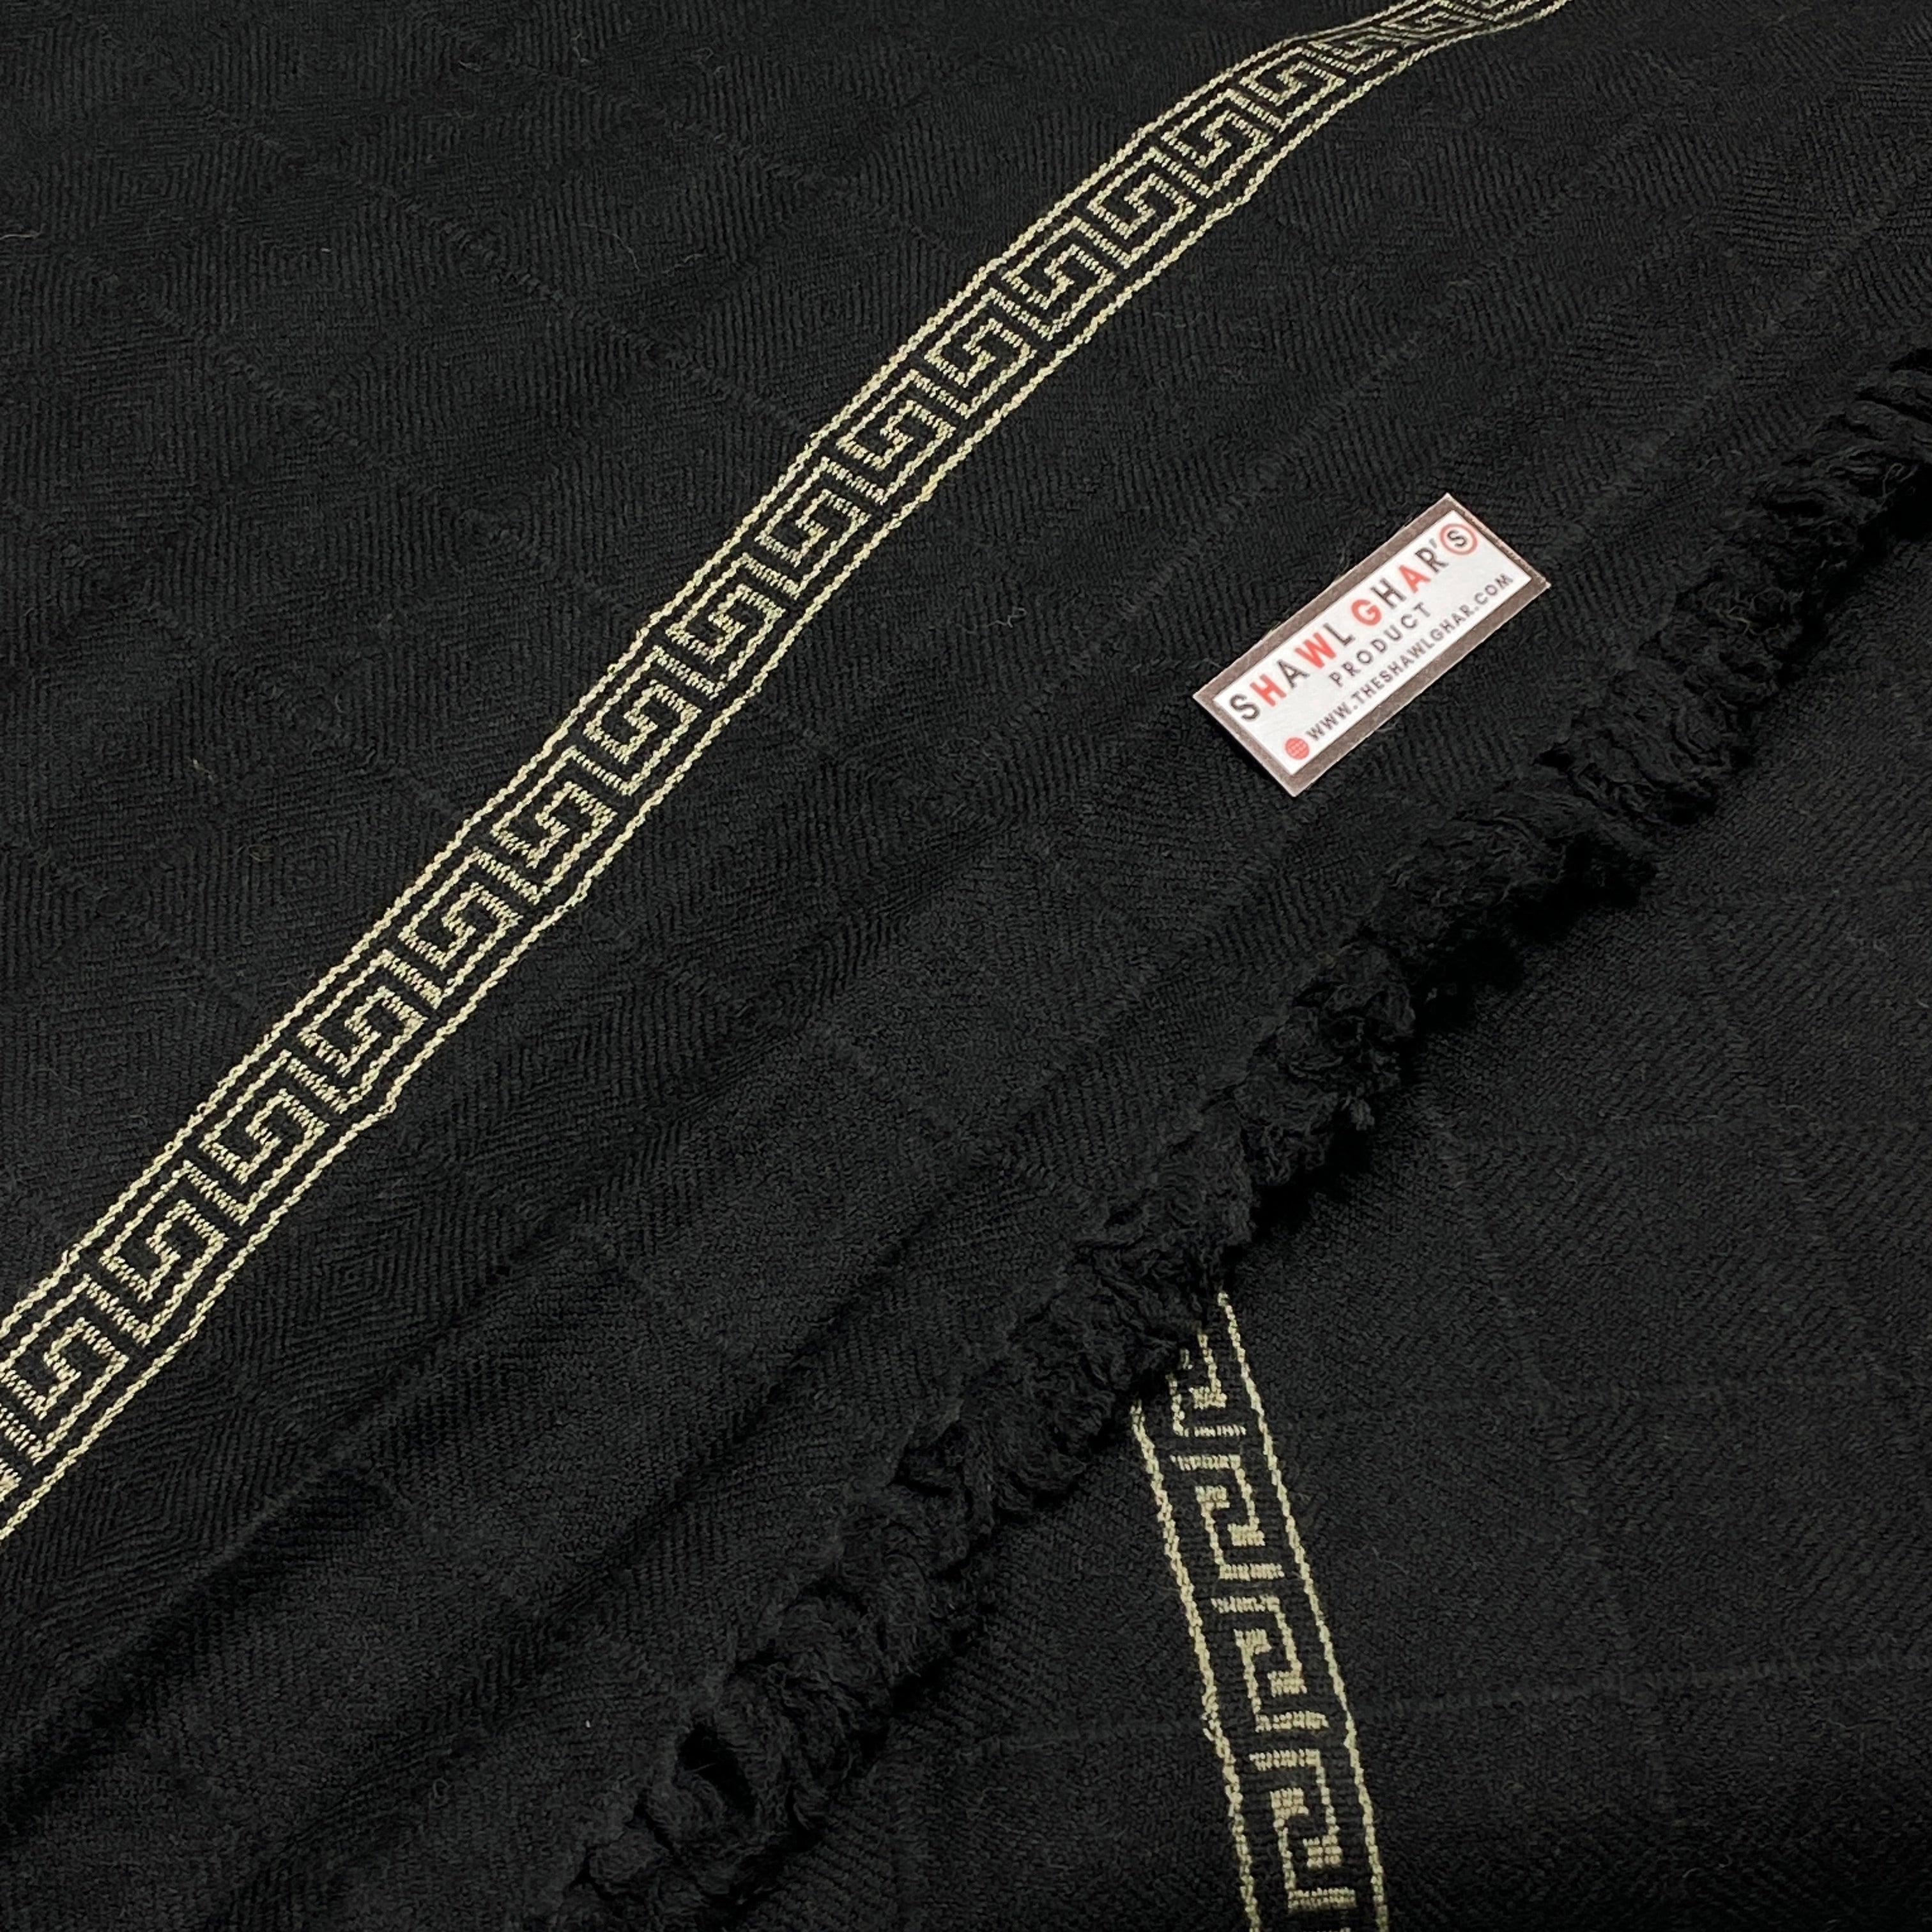 CheckMate Wool Shawl - Black Color